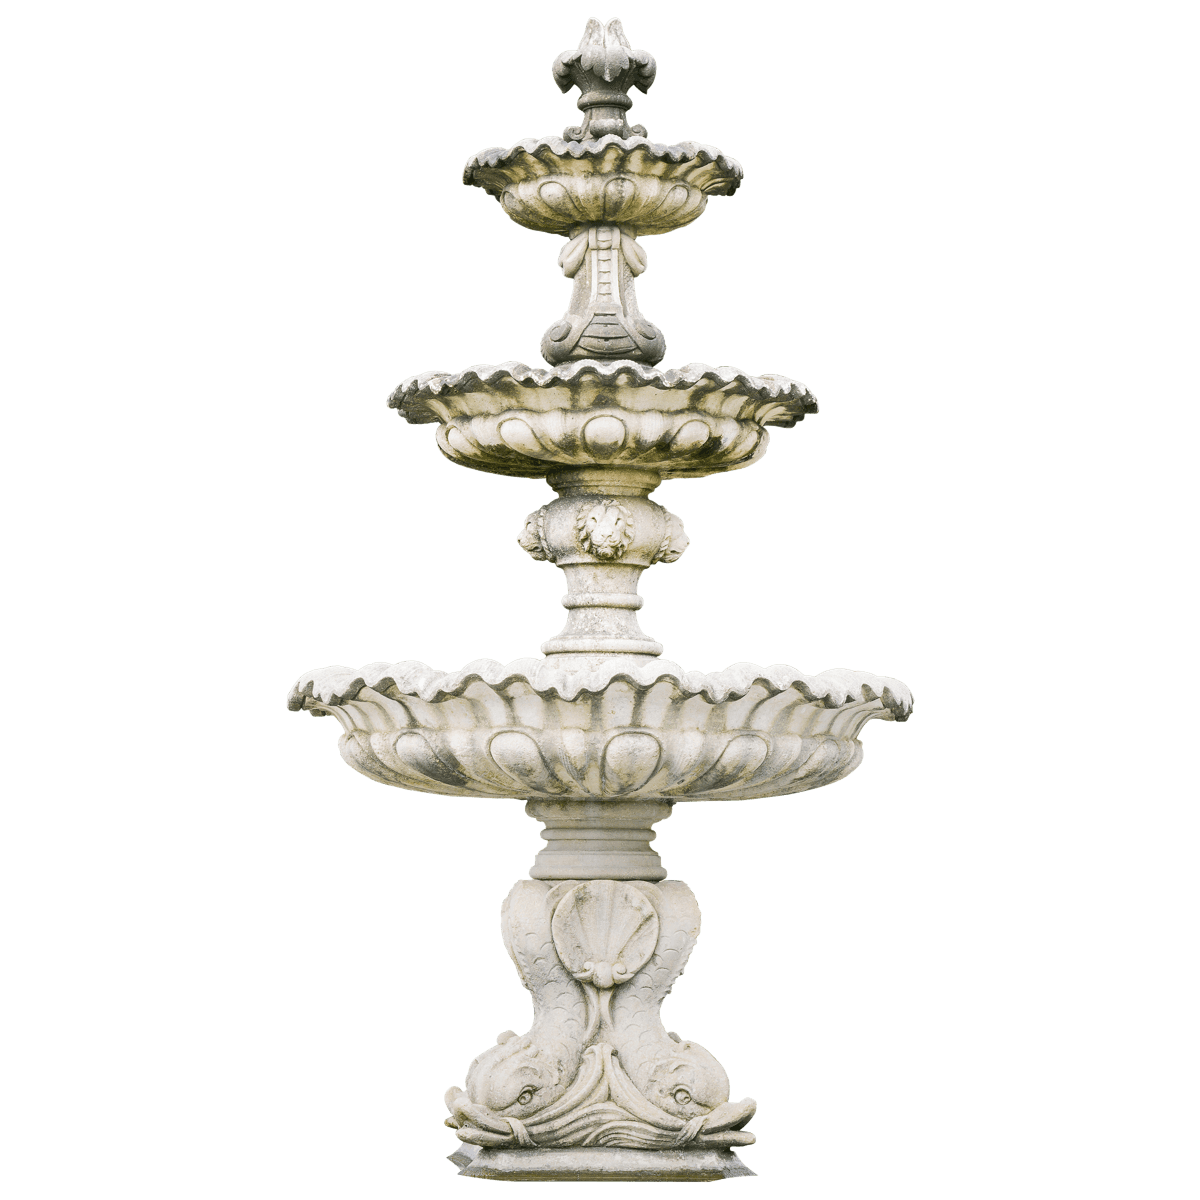 Fountain Free Transparent Image HQ PNG Image